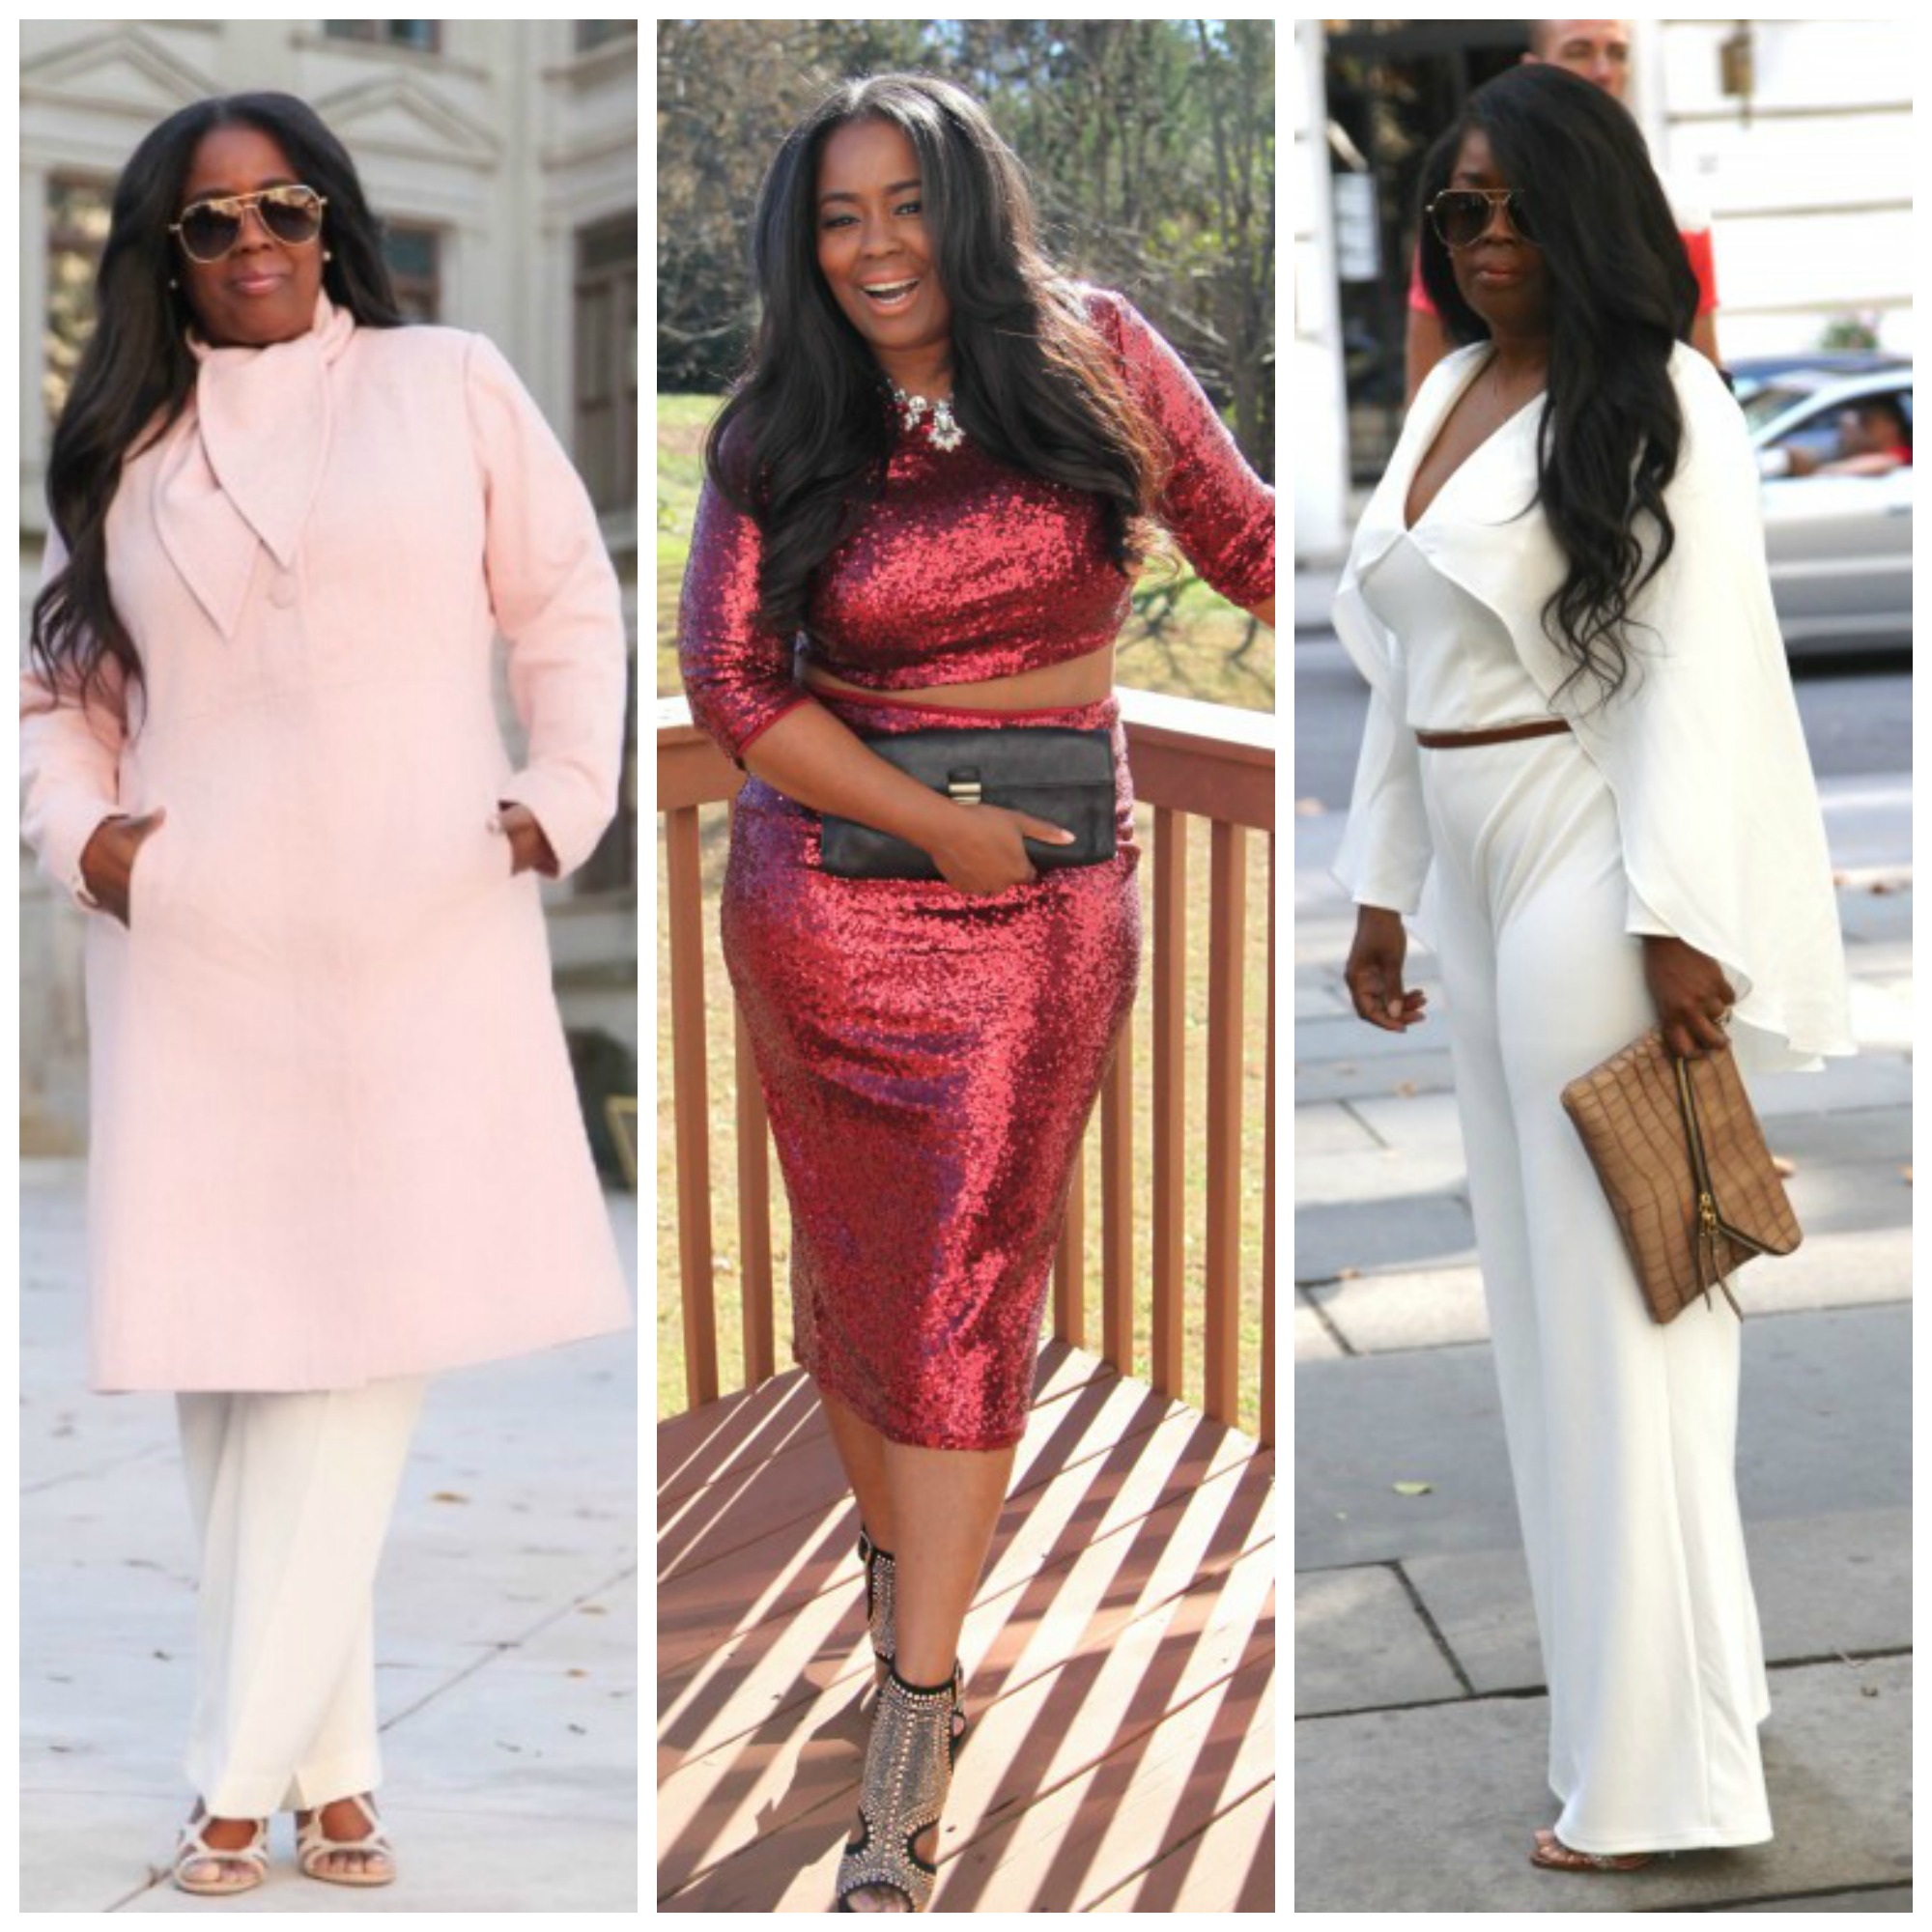 My All-Time Favorite Looks Of 2015!